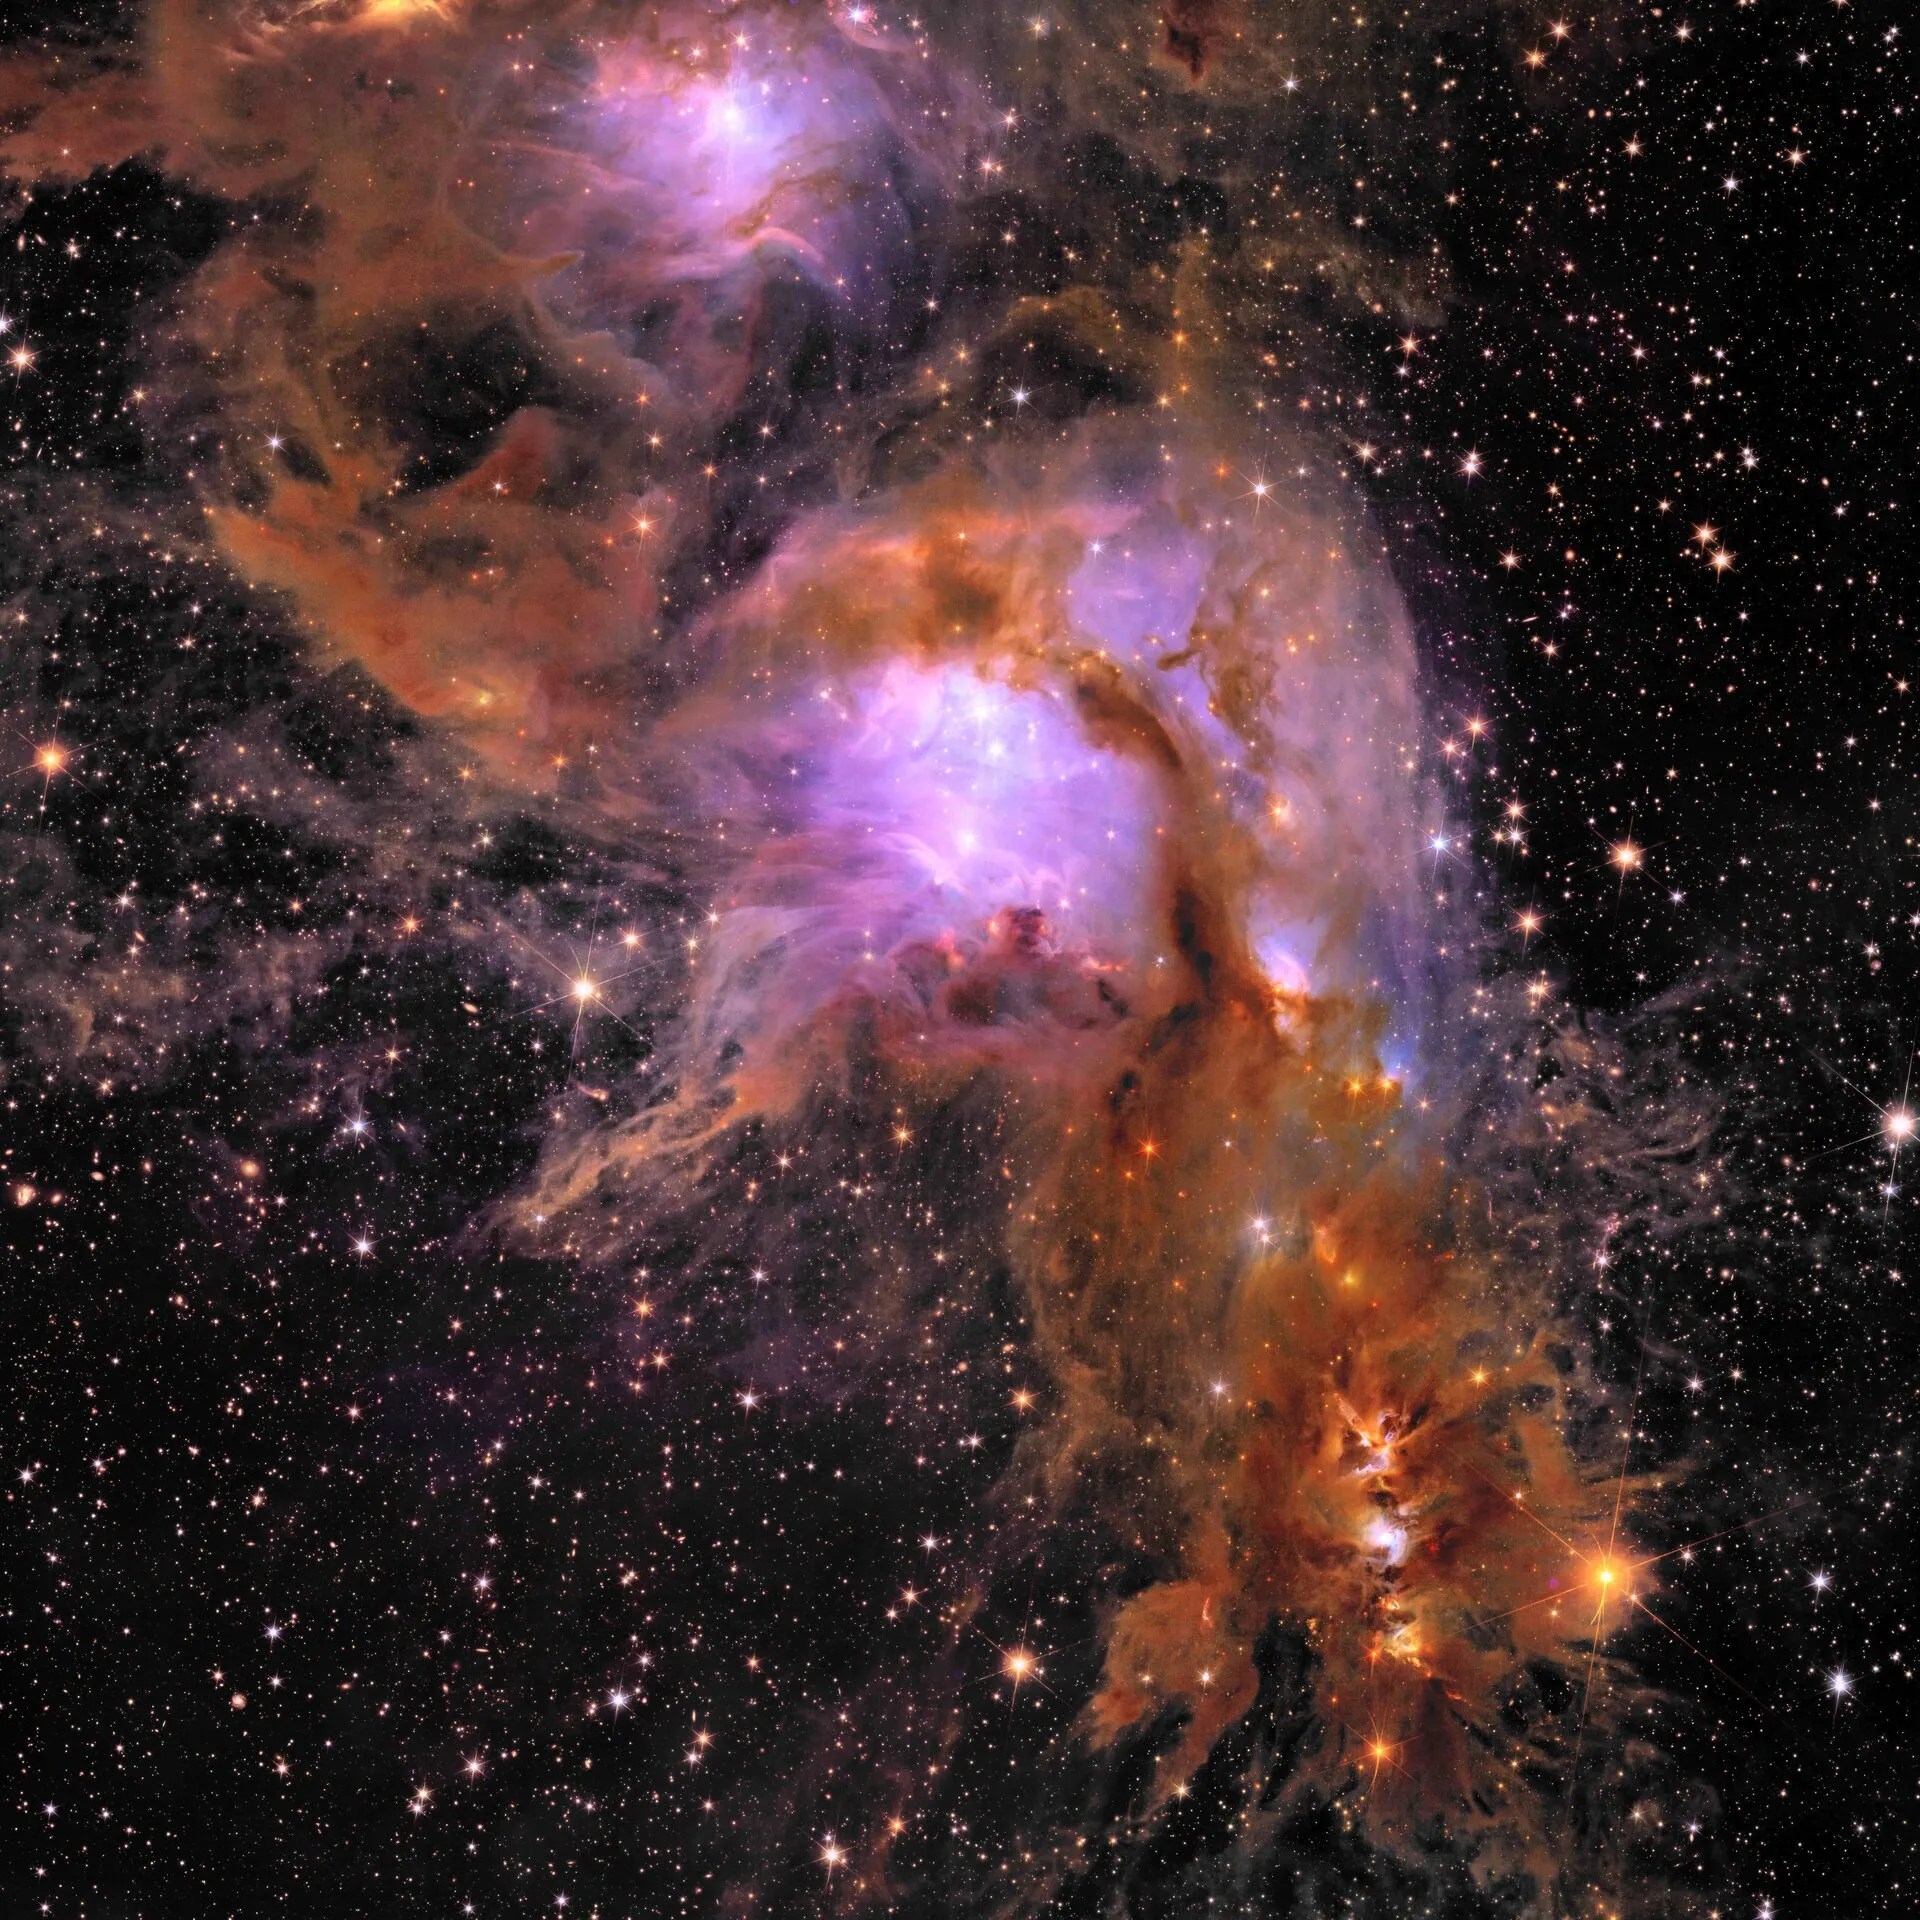 A vibrant cosmic scene showing the star-forming region Messier 78, also known as M78. The image features a stunning mix of colors, with glowing purples, oranges, and pinks among a backdrop of countless stars. Nebulous clouds of gas and dust create intricate and wispy structures, with areas of bright illumination indicating the presence of young, hot stars. The overall effect is a mesmerizing and dynamic view of space, showcasing the beauty and complexity of stellar nurseries.